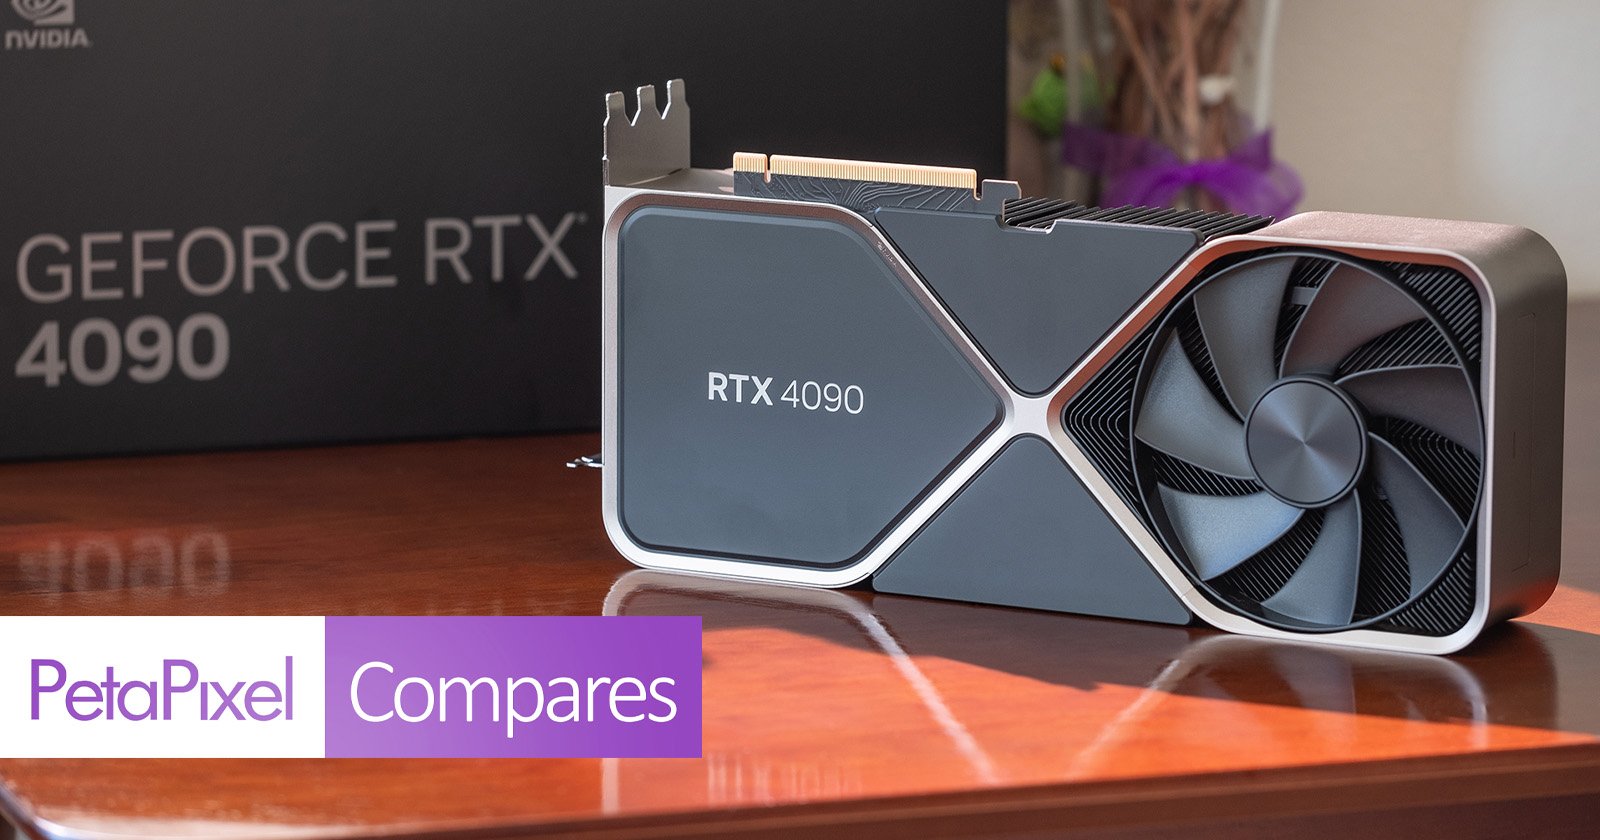 The NVIDIA RTX 4090 is Amazing, and Photographers Should NOT Buy